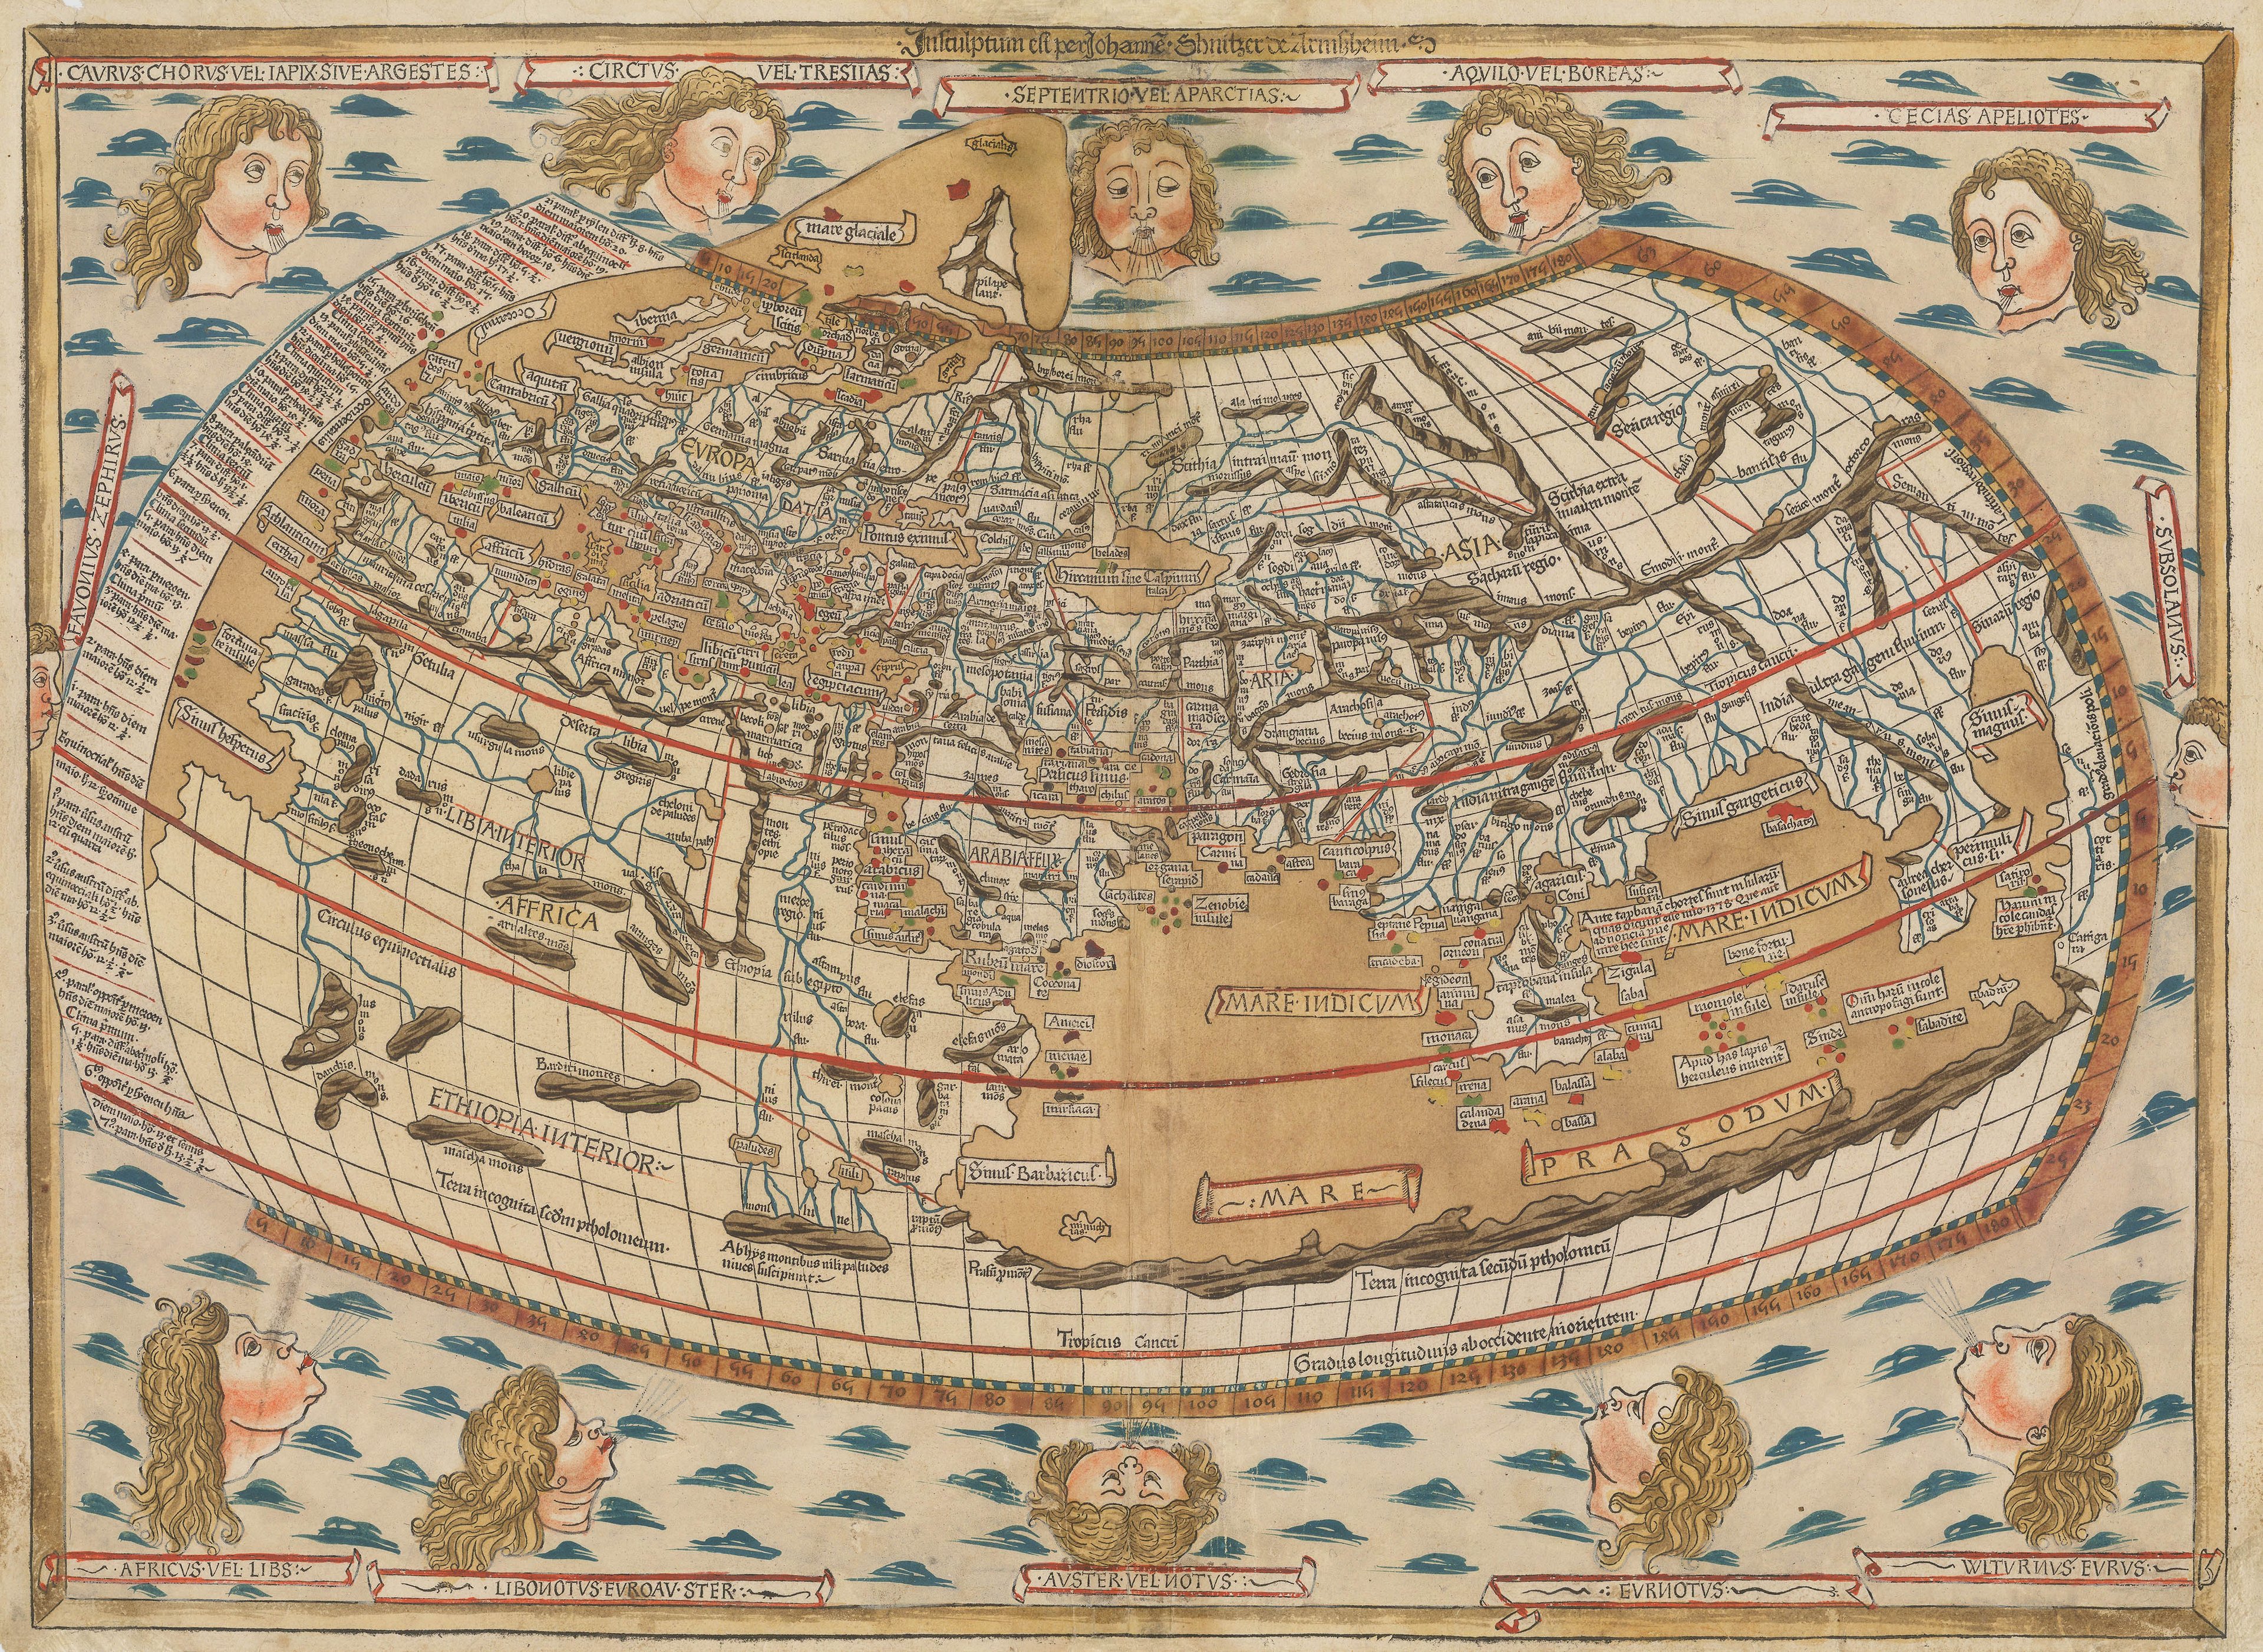 Johann Reger's re-issue of the Ulm Ptolemaic map